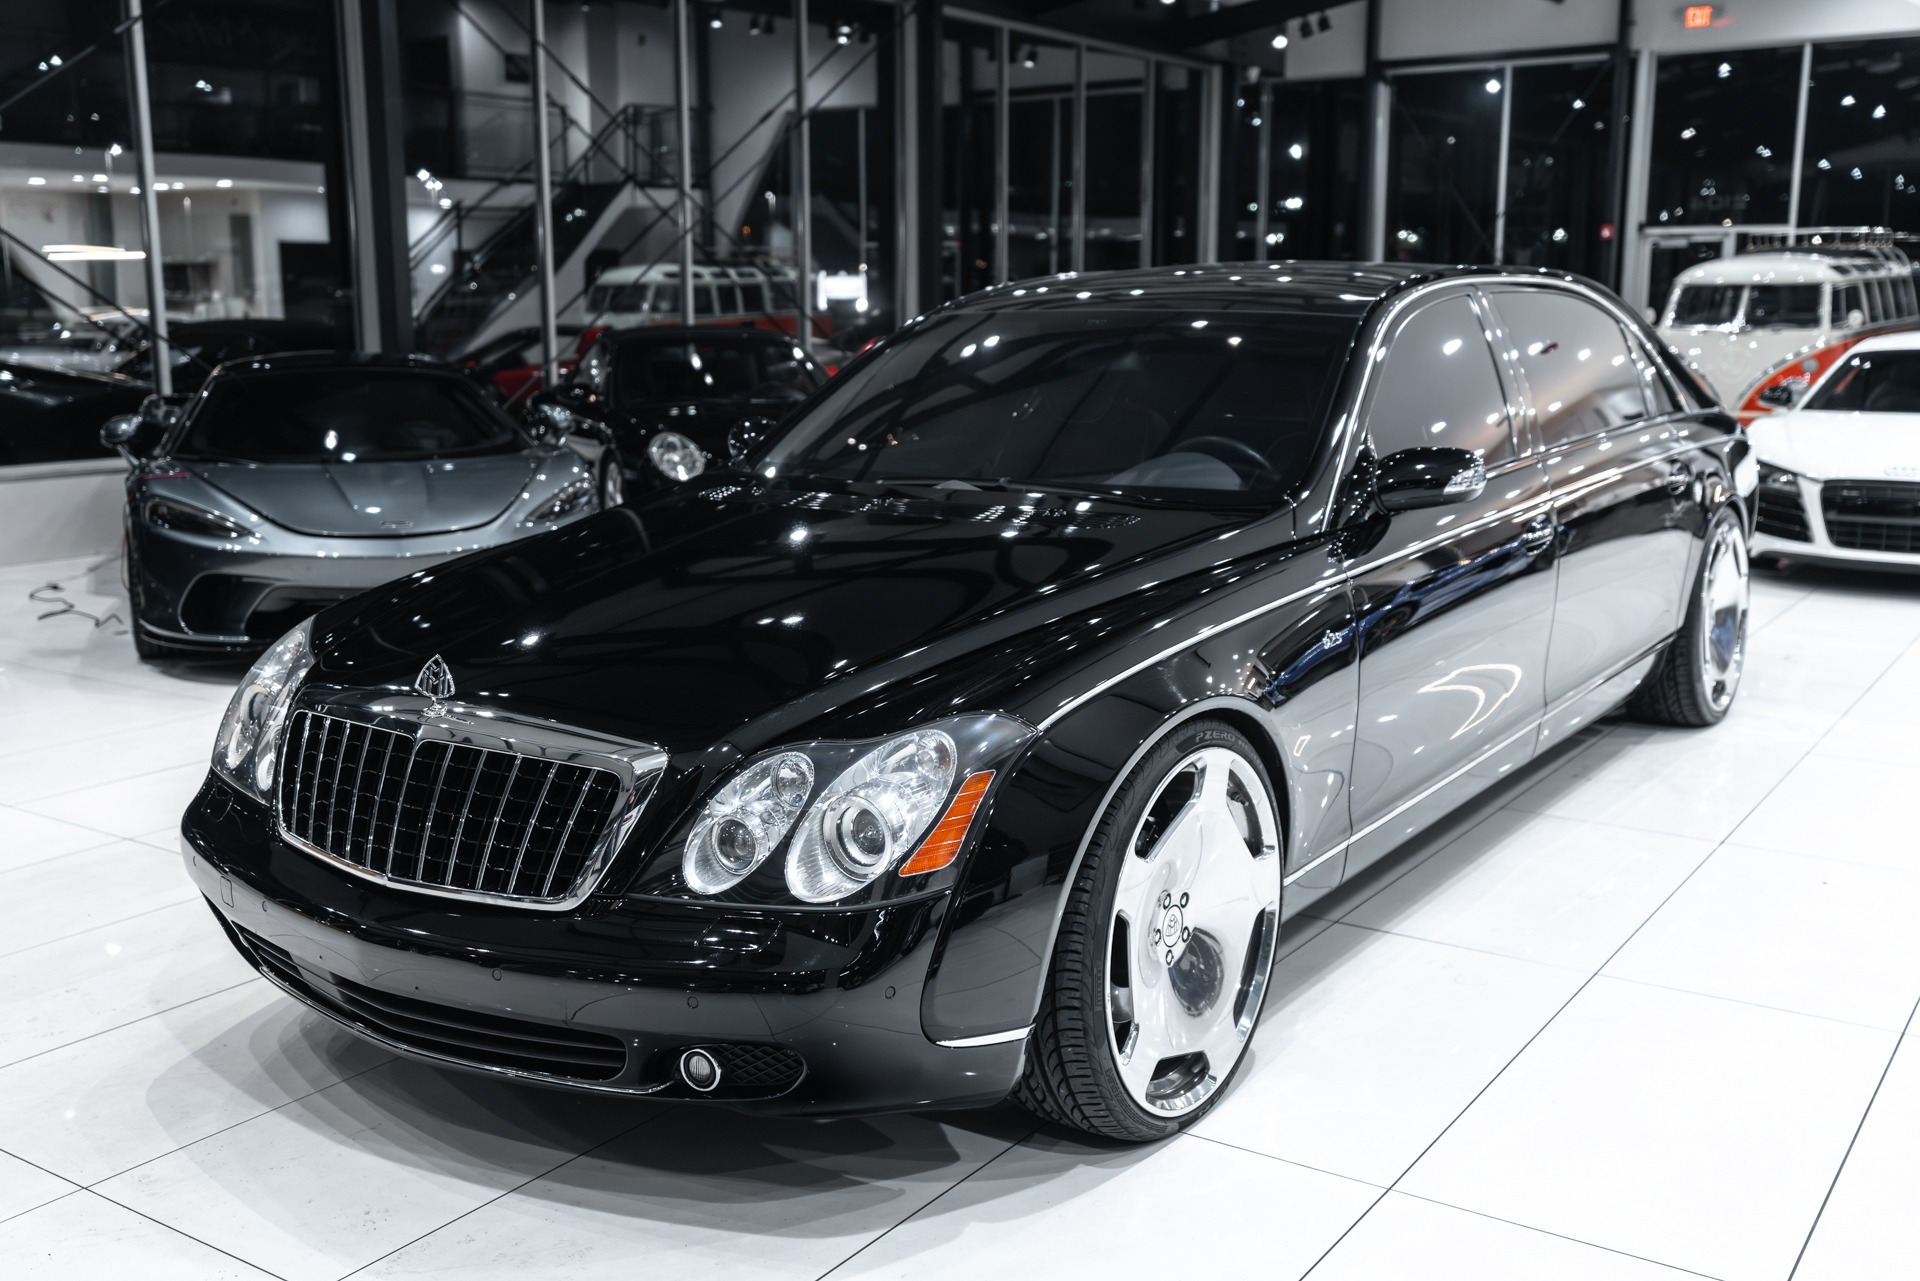 Used-2008-Maybach-62S-Sedan-Factory-Partition-RARE-Black-on-Black-Serviced-LOADED-MSRP-490k